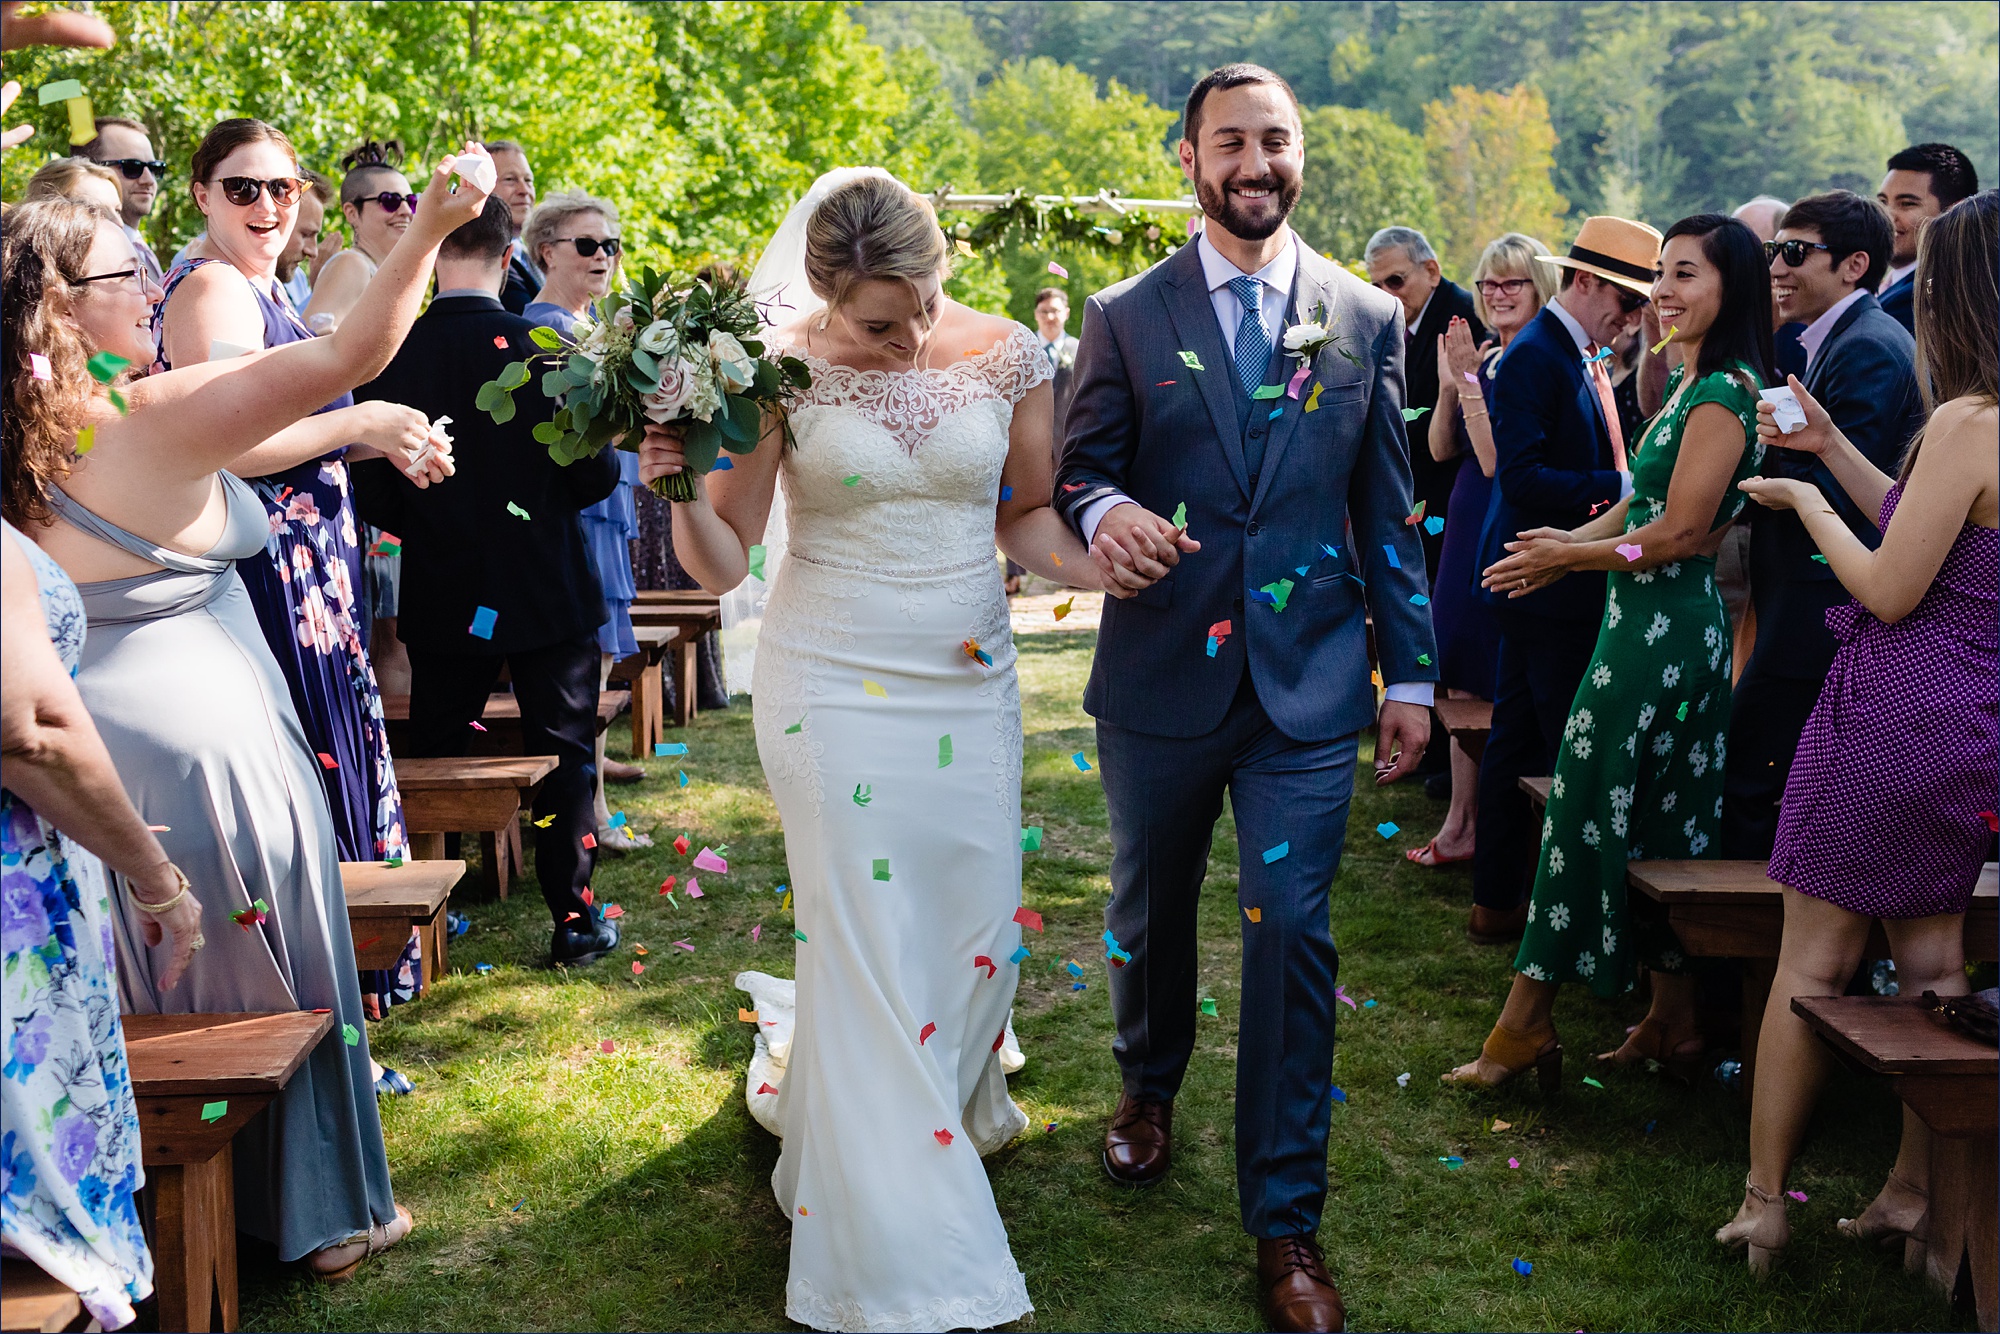 The bride and groom come back up the aisle to a shower of confetti after their outdoor wedding ceremony in NH